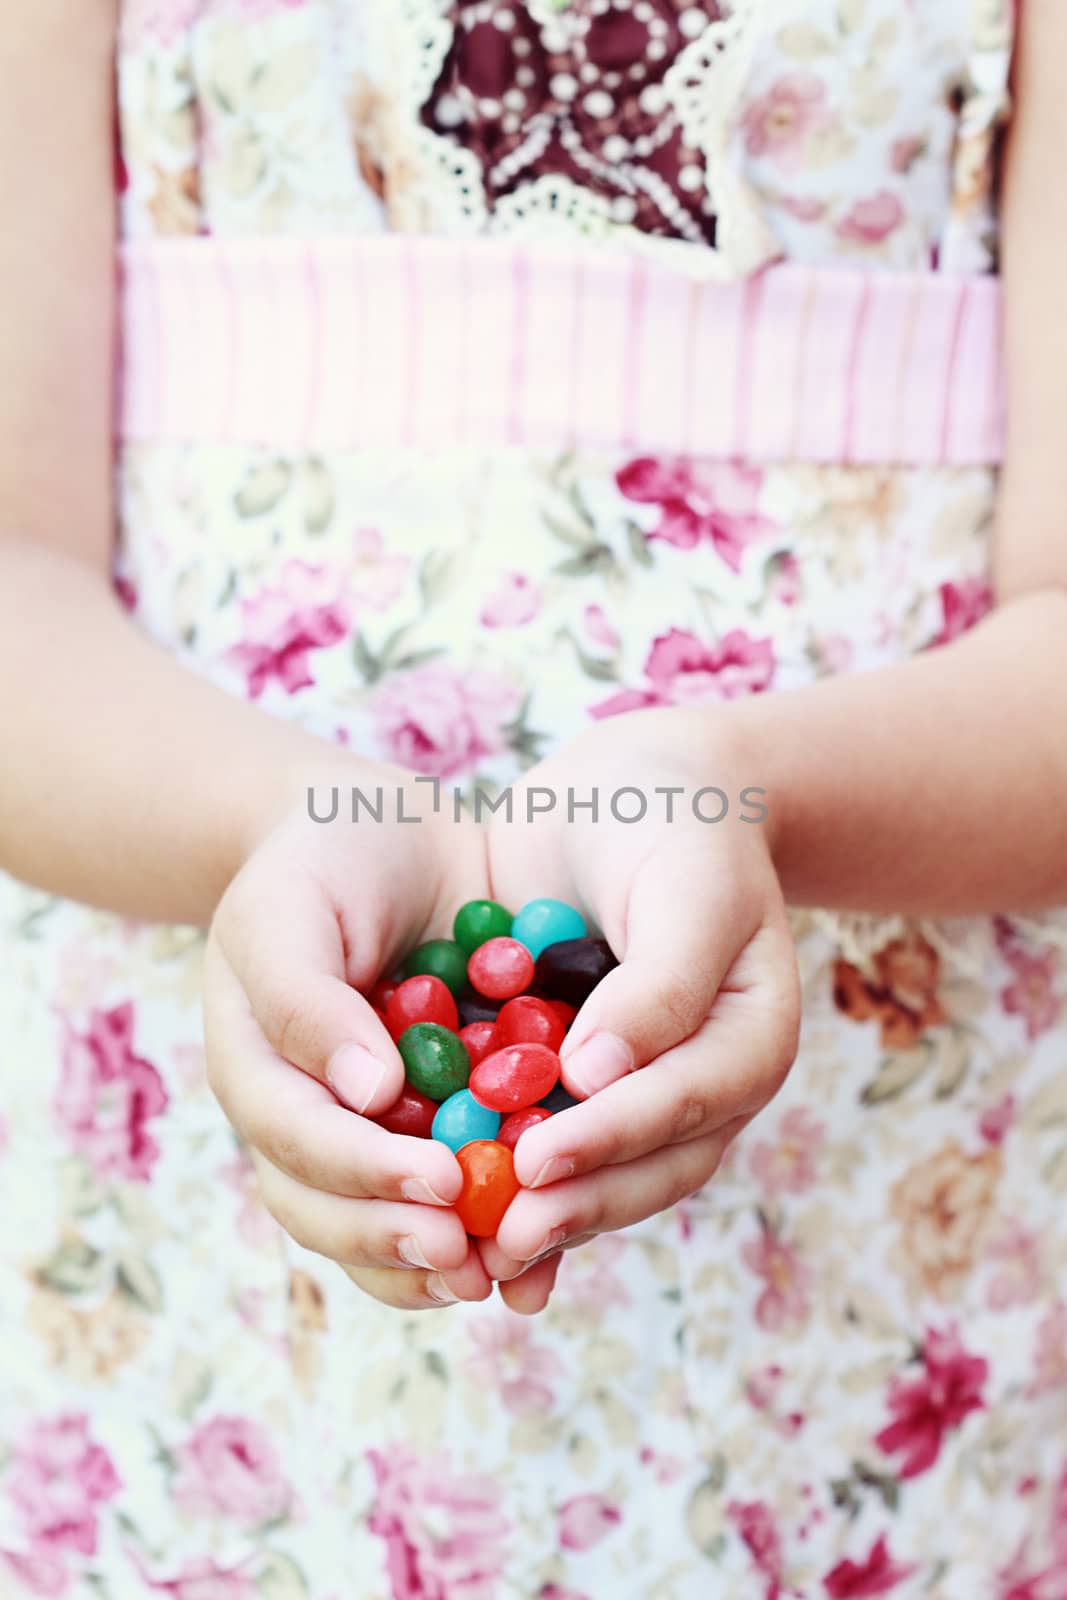 Jellybeans in hand by StephanieFrey